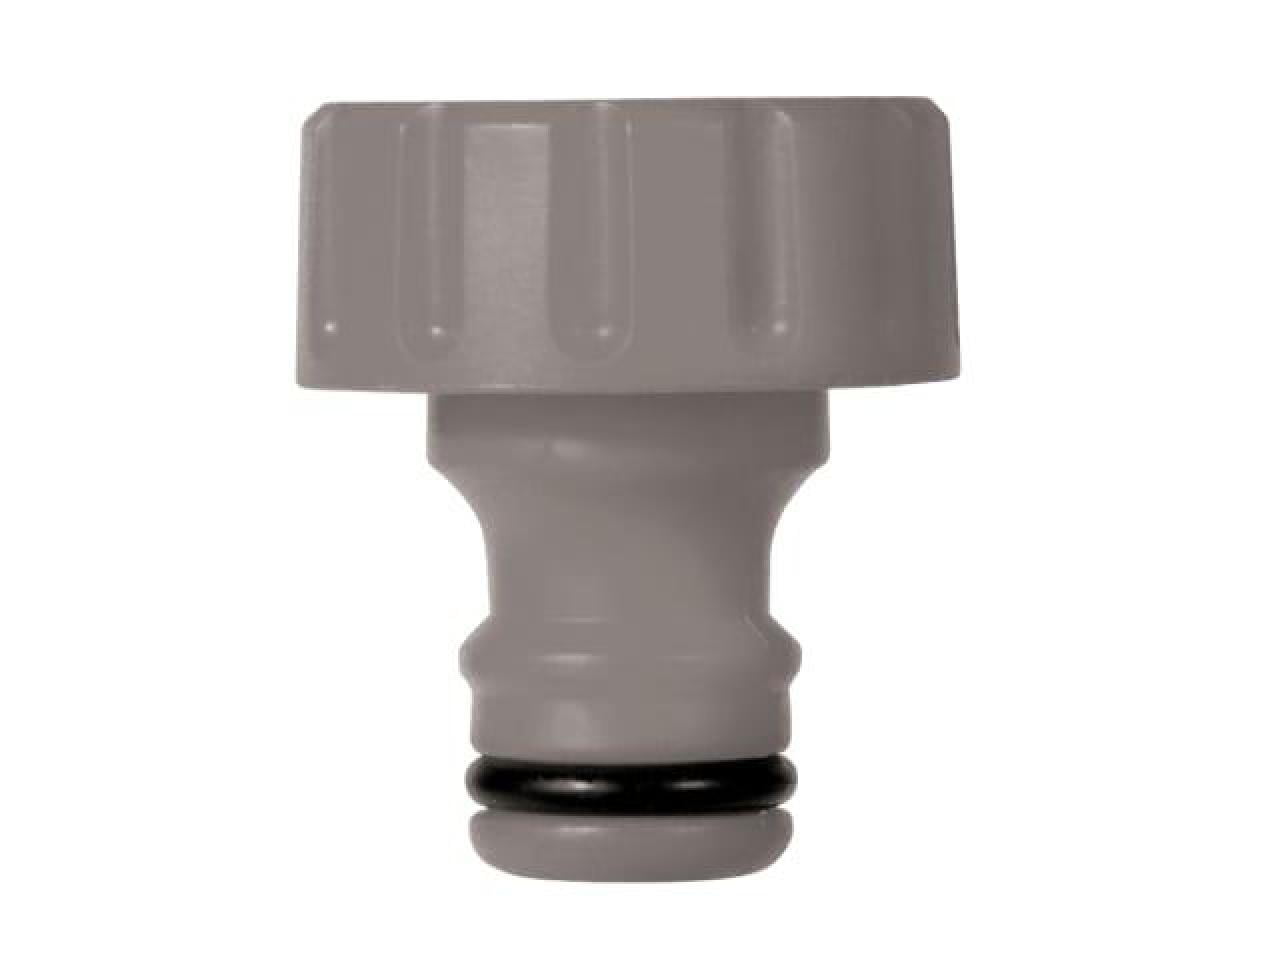 Hozelock Hozelock Inlet Adaptor for Reels and Carts 2169 Replacement Inlet 